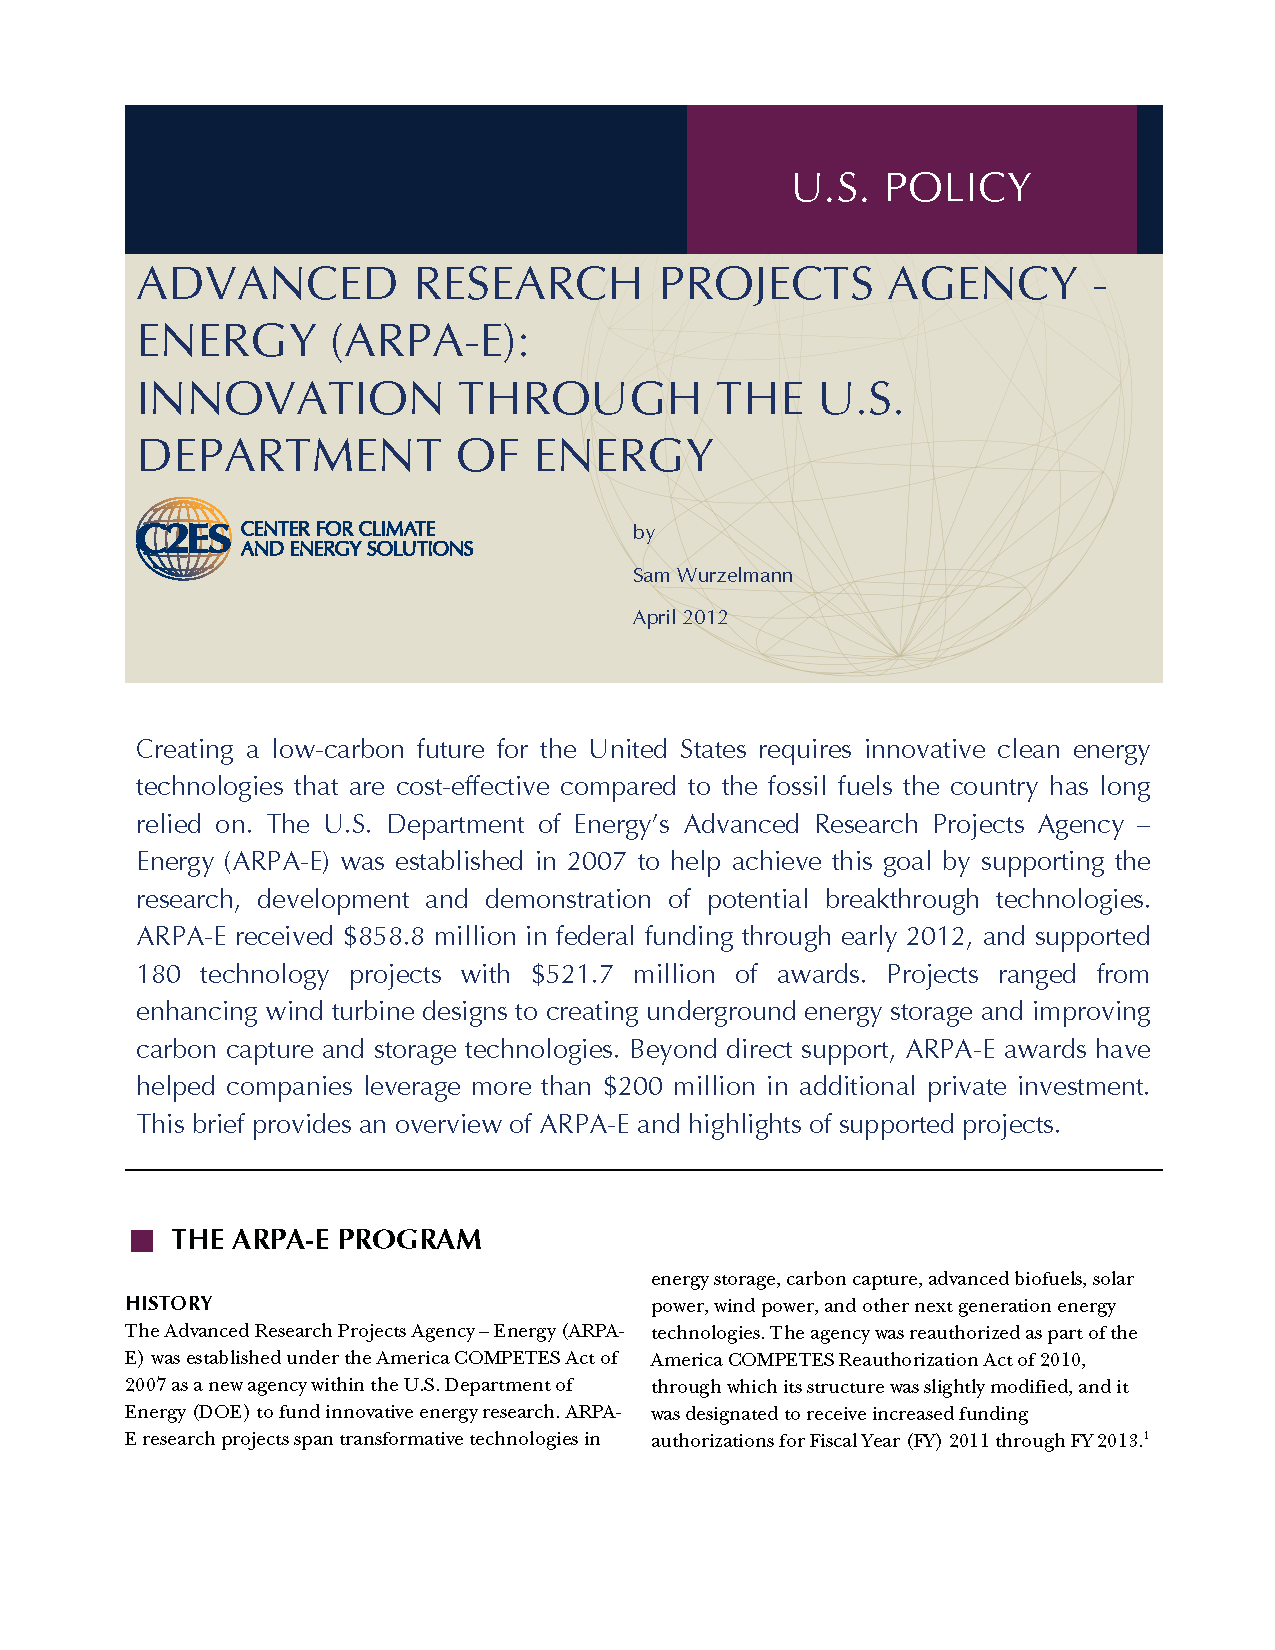 advanced research projects agency definition